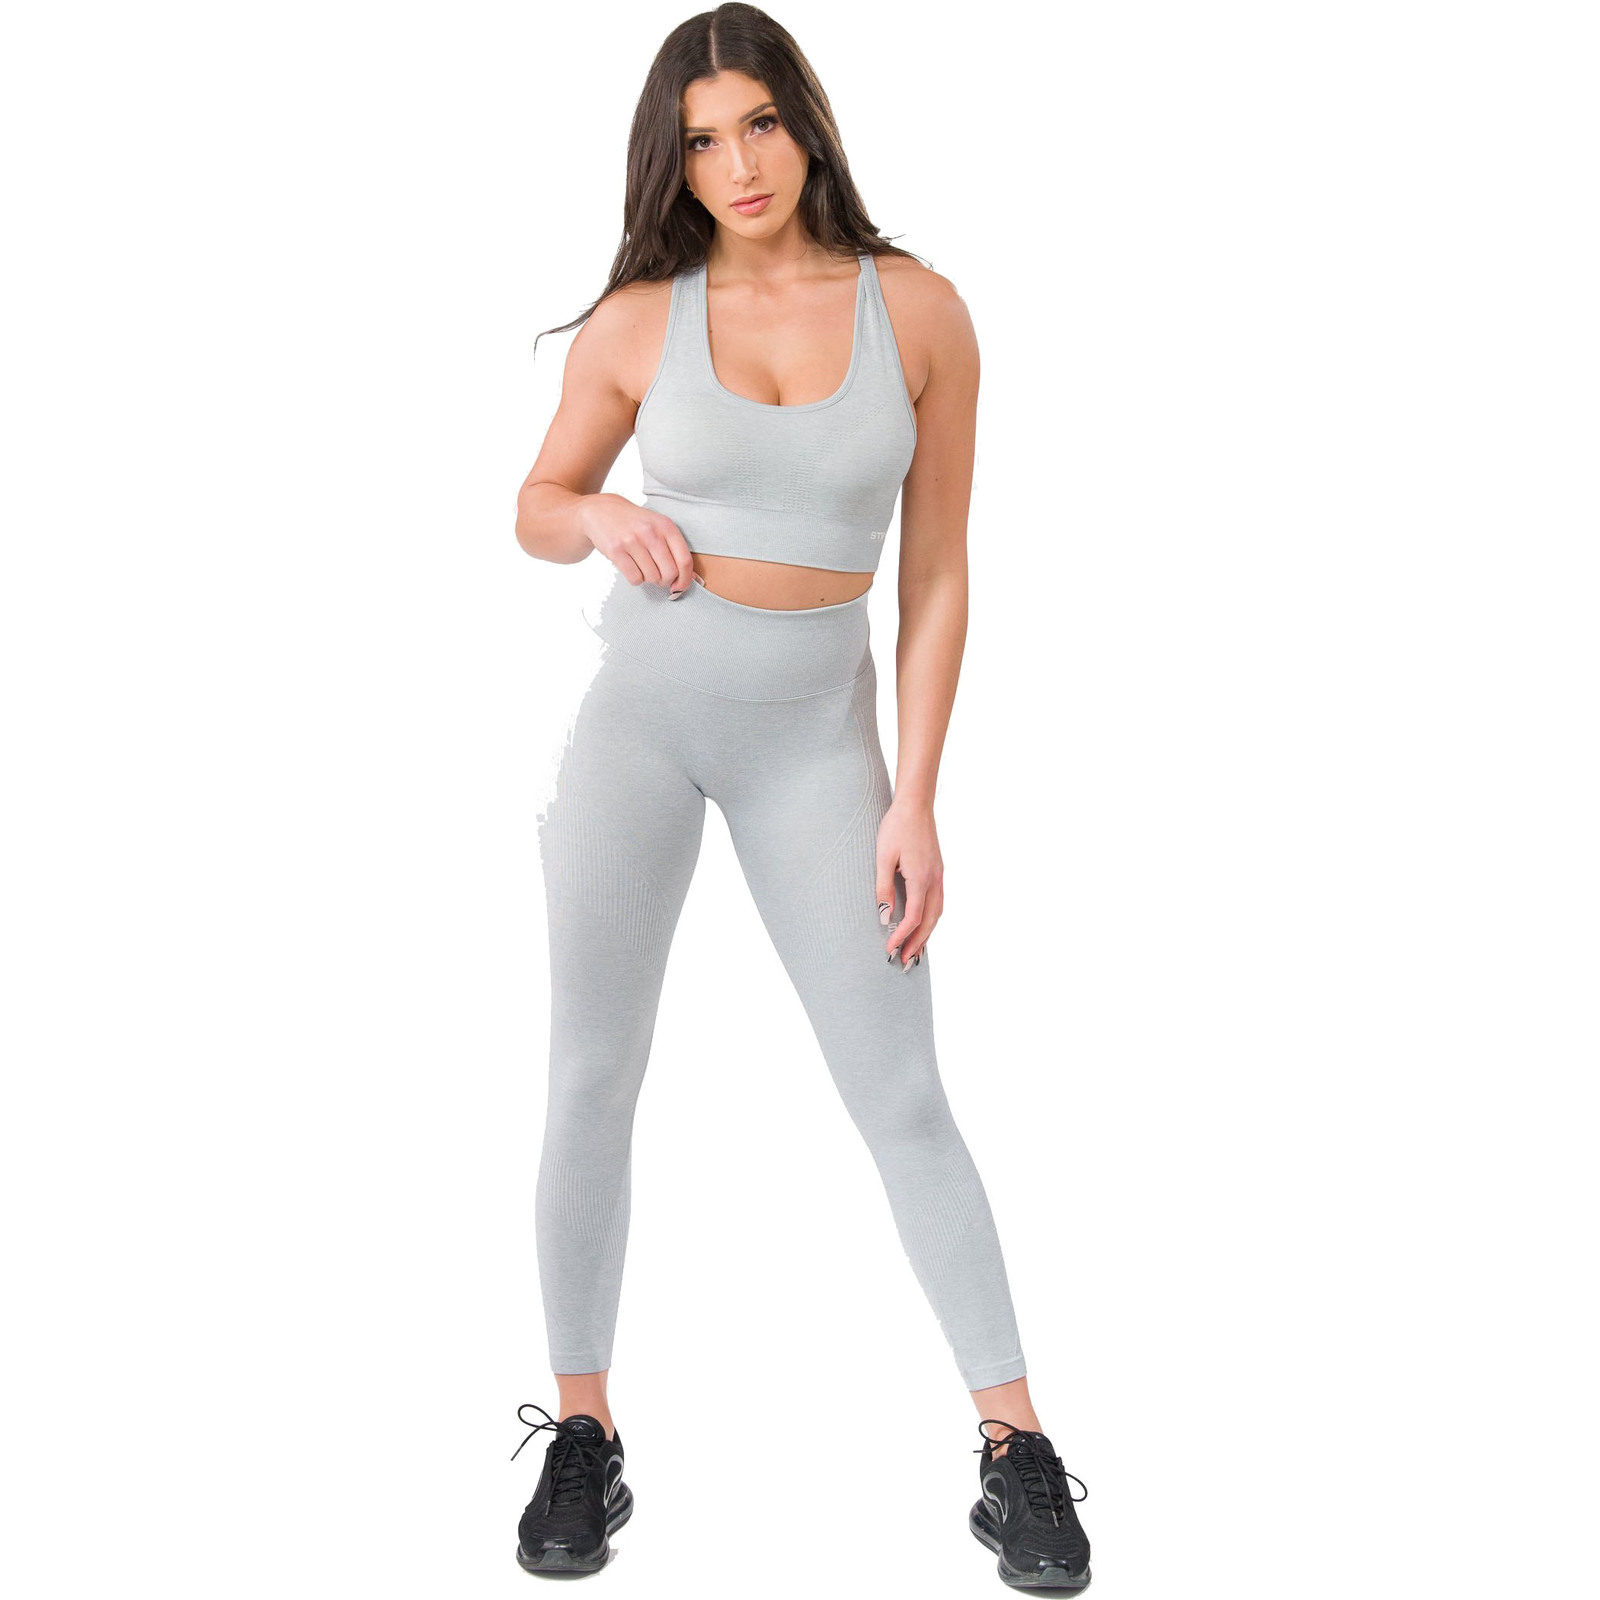 Sting Allure Grey Marle Seamless Leggings at FightHQ